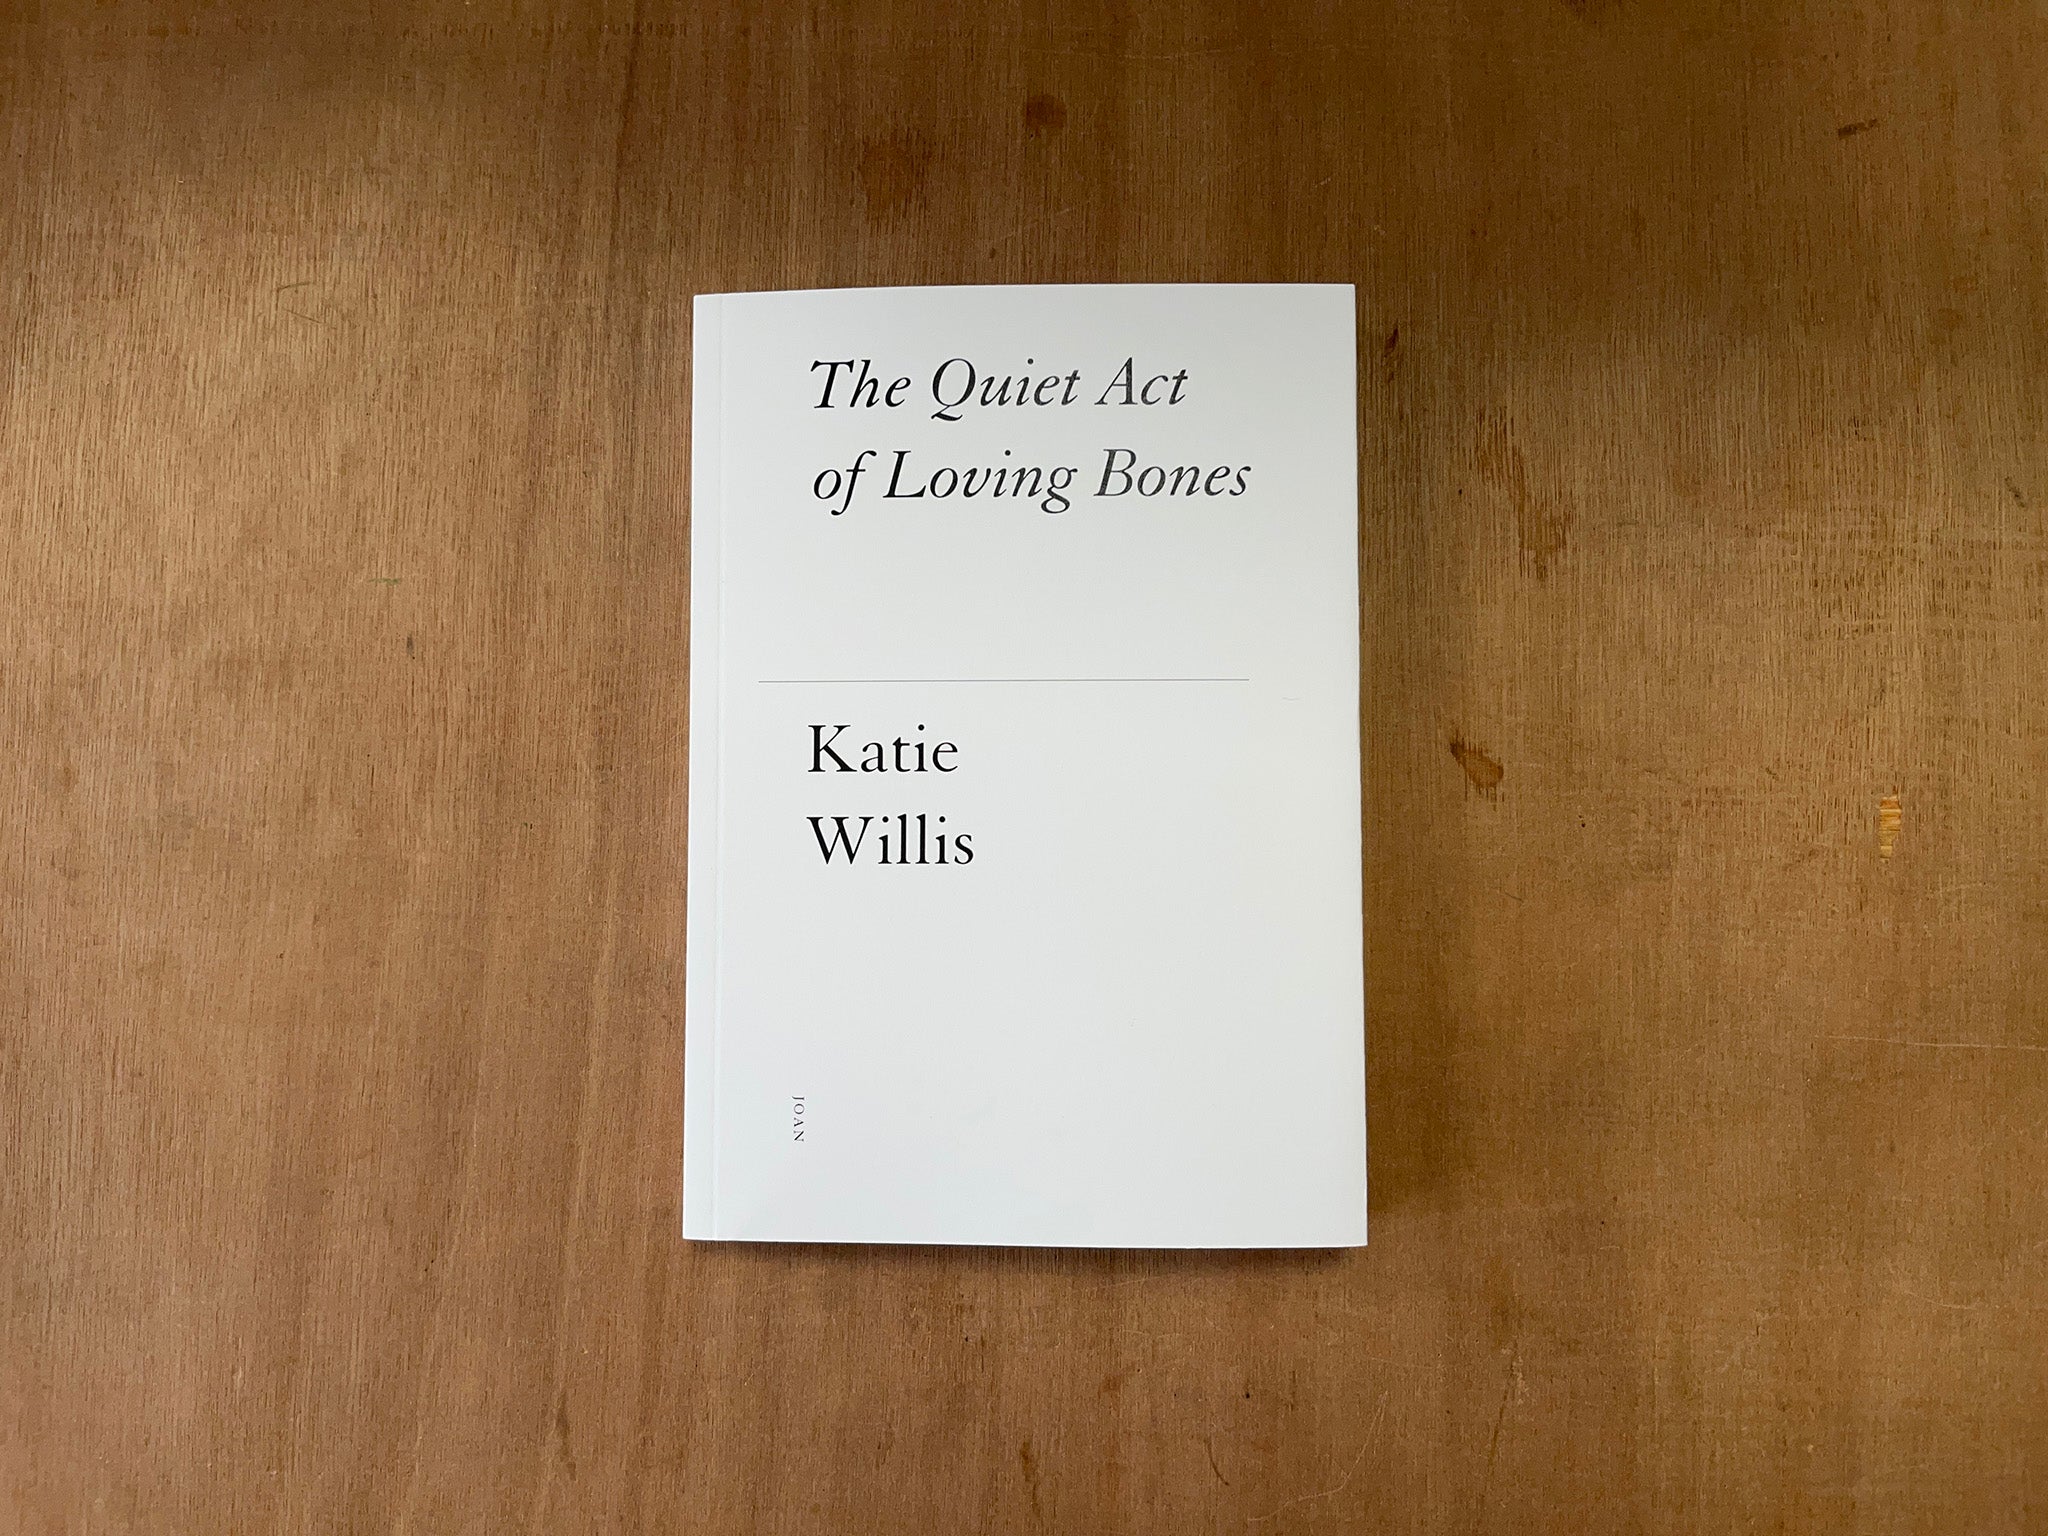 THE QUIET ACT OF LOVING BONES by Kate Willis